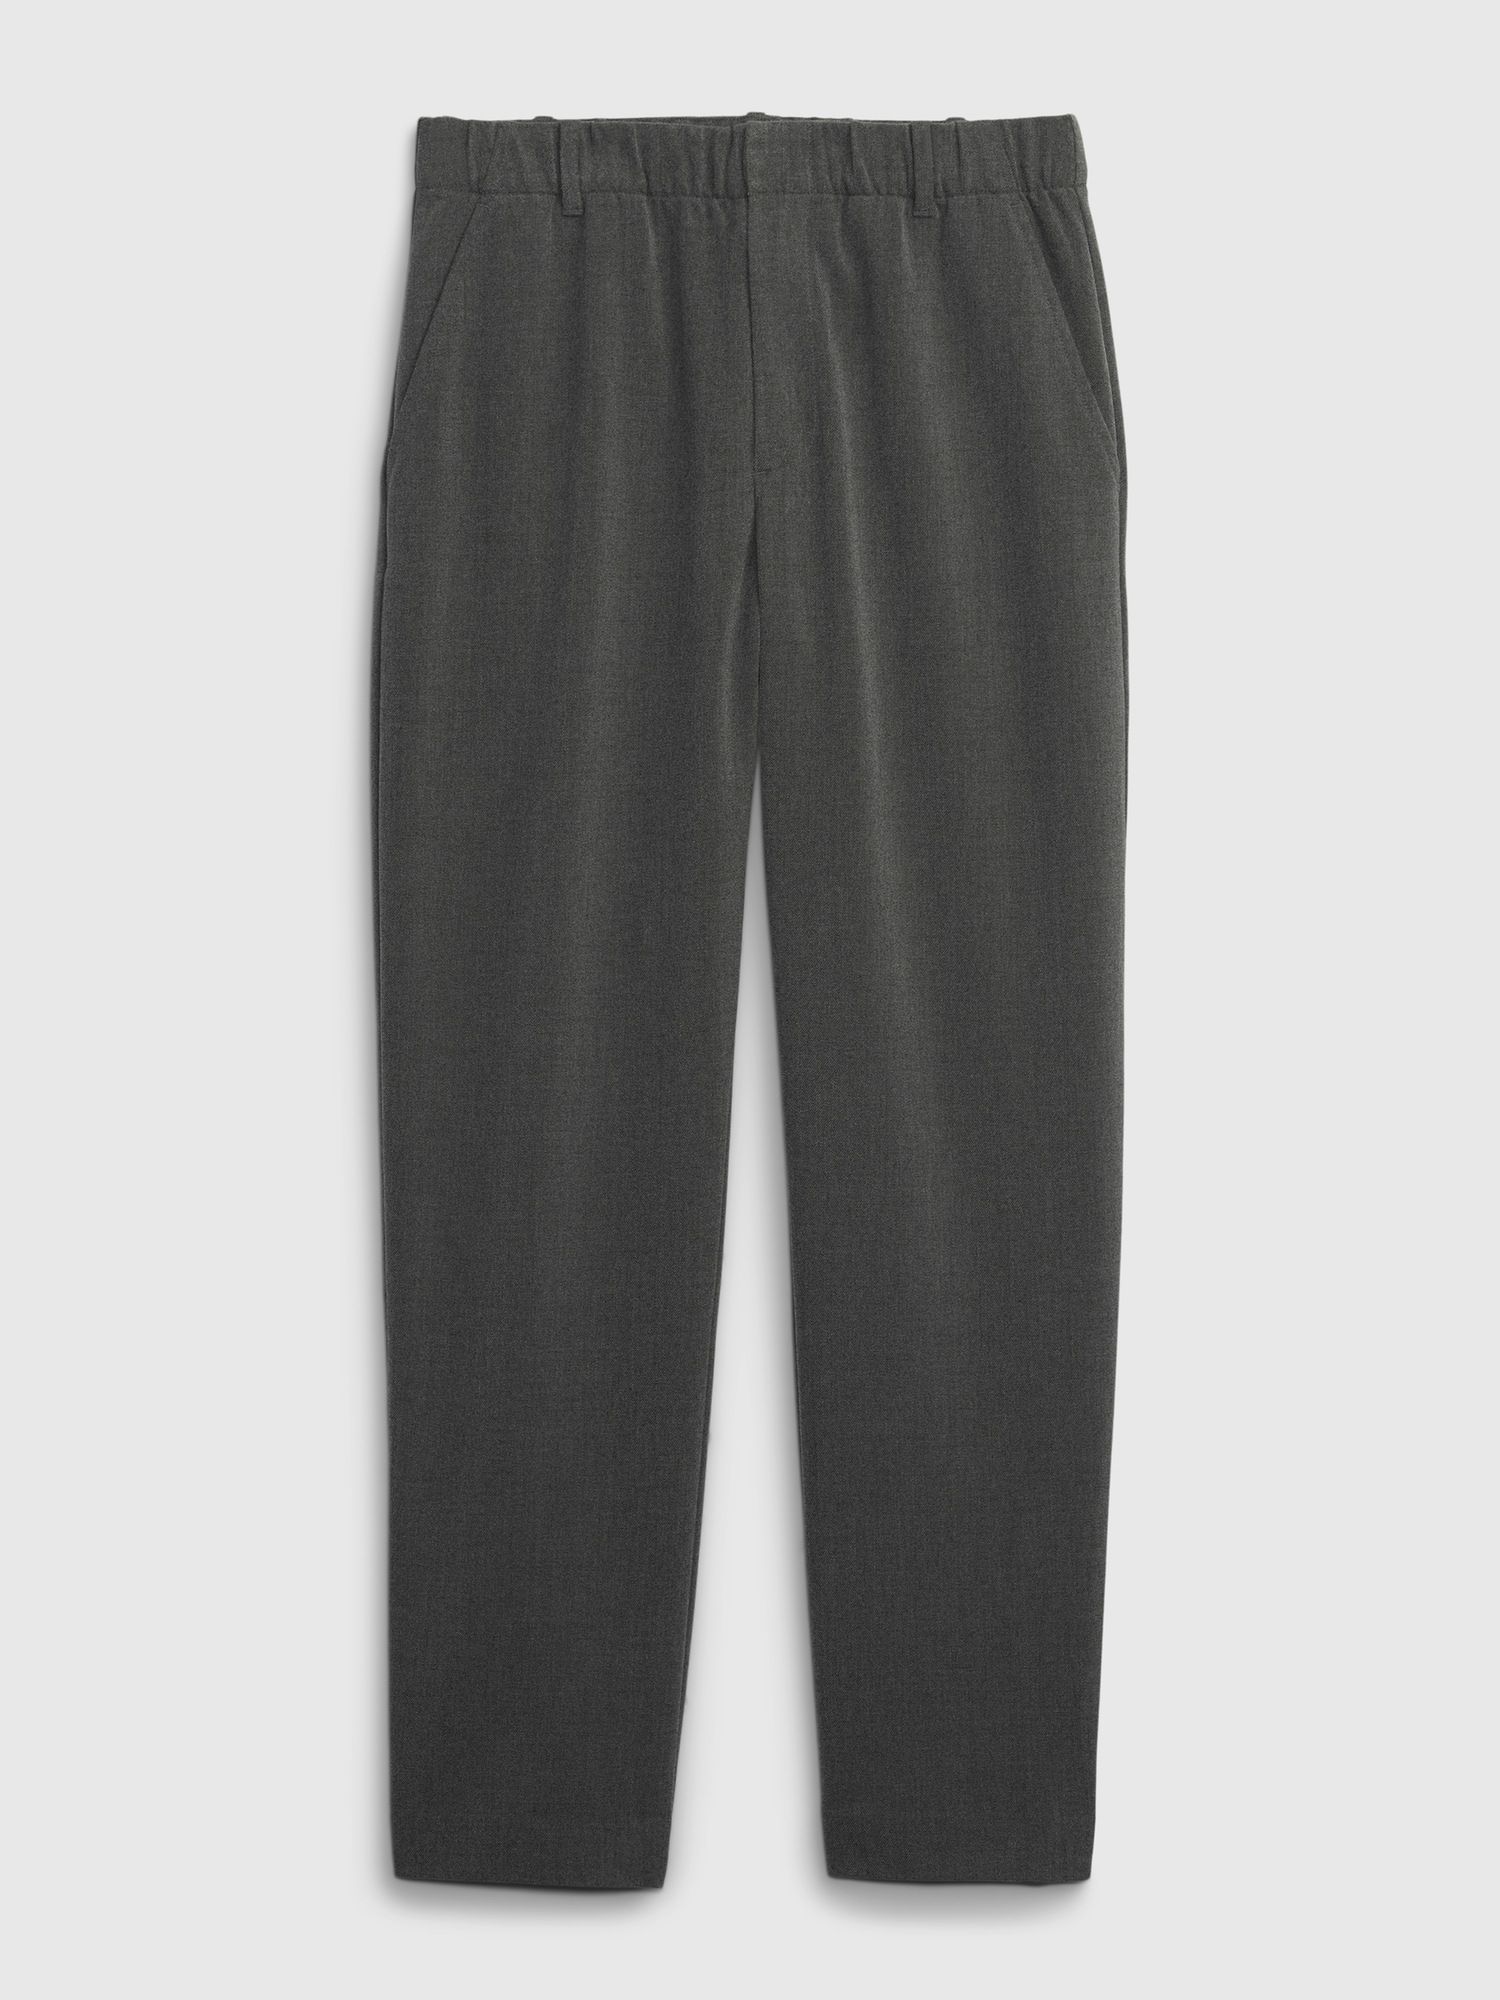 High Rise Relaxed Straight Pull-On Pants | Gap